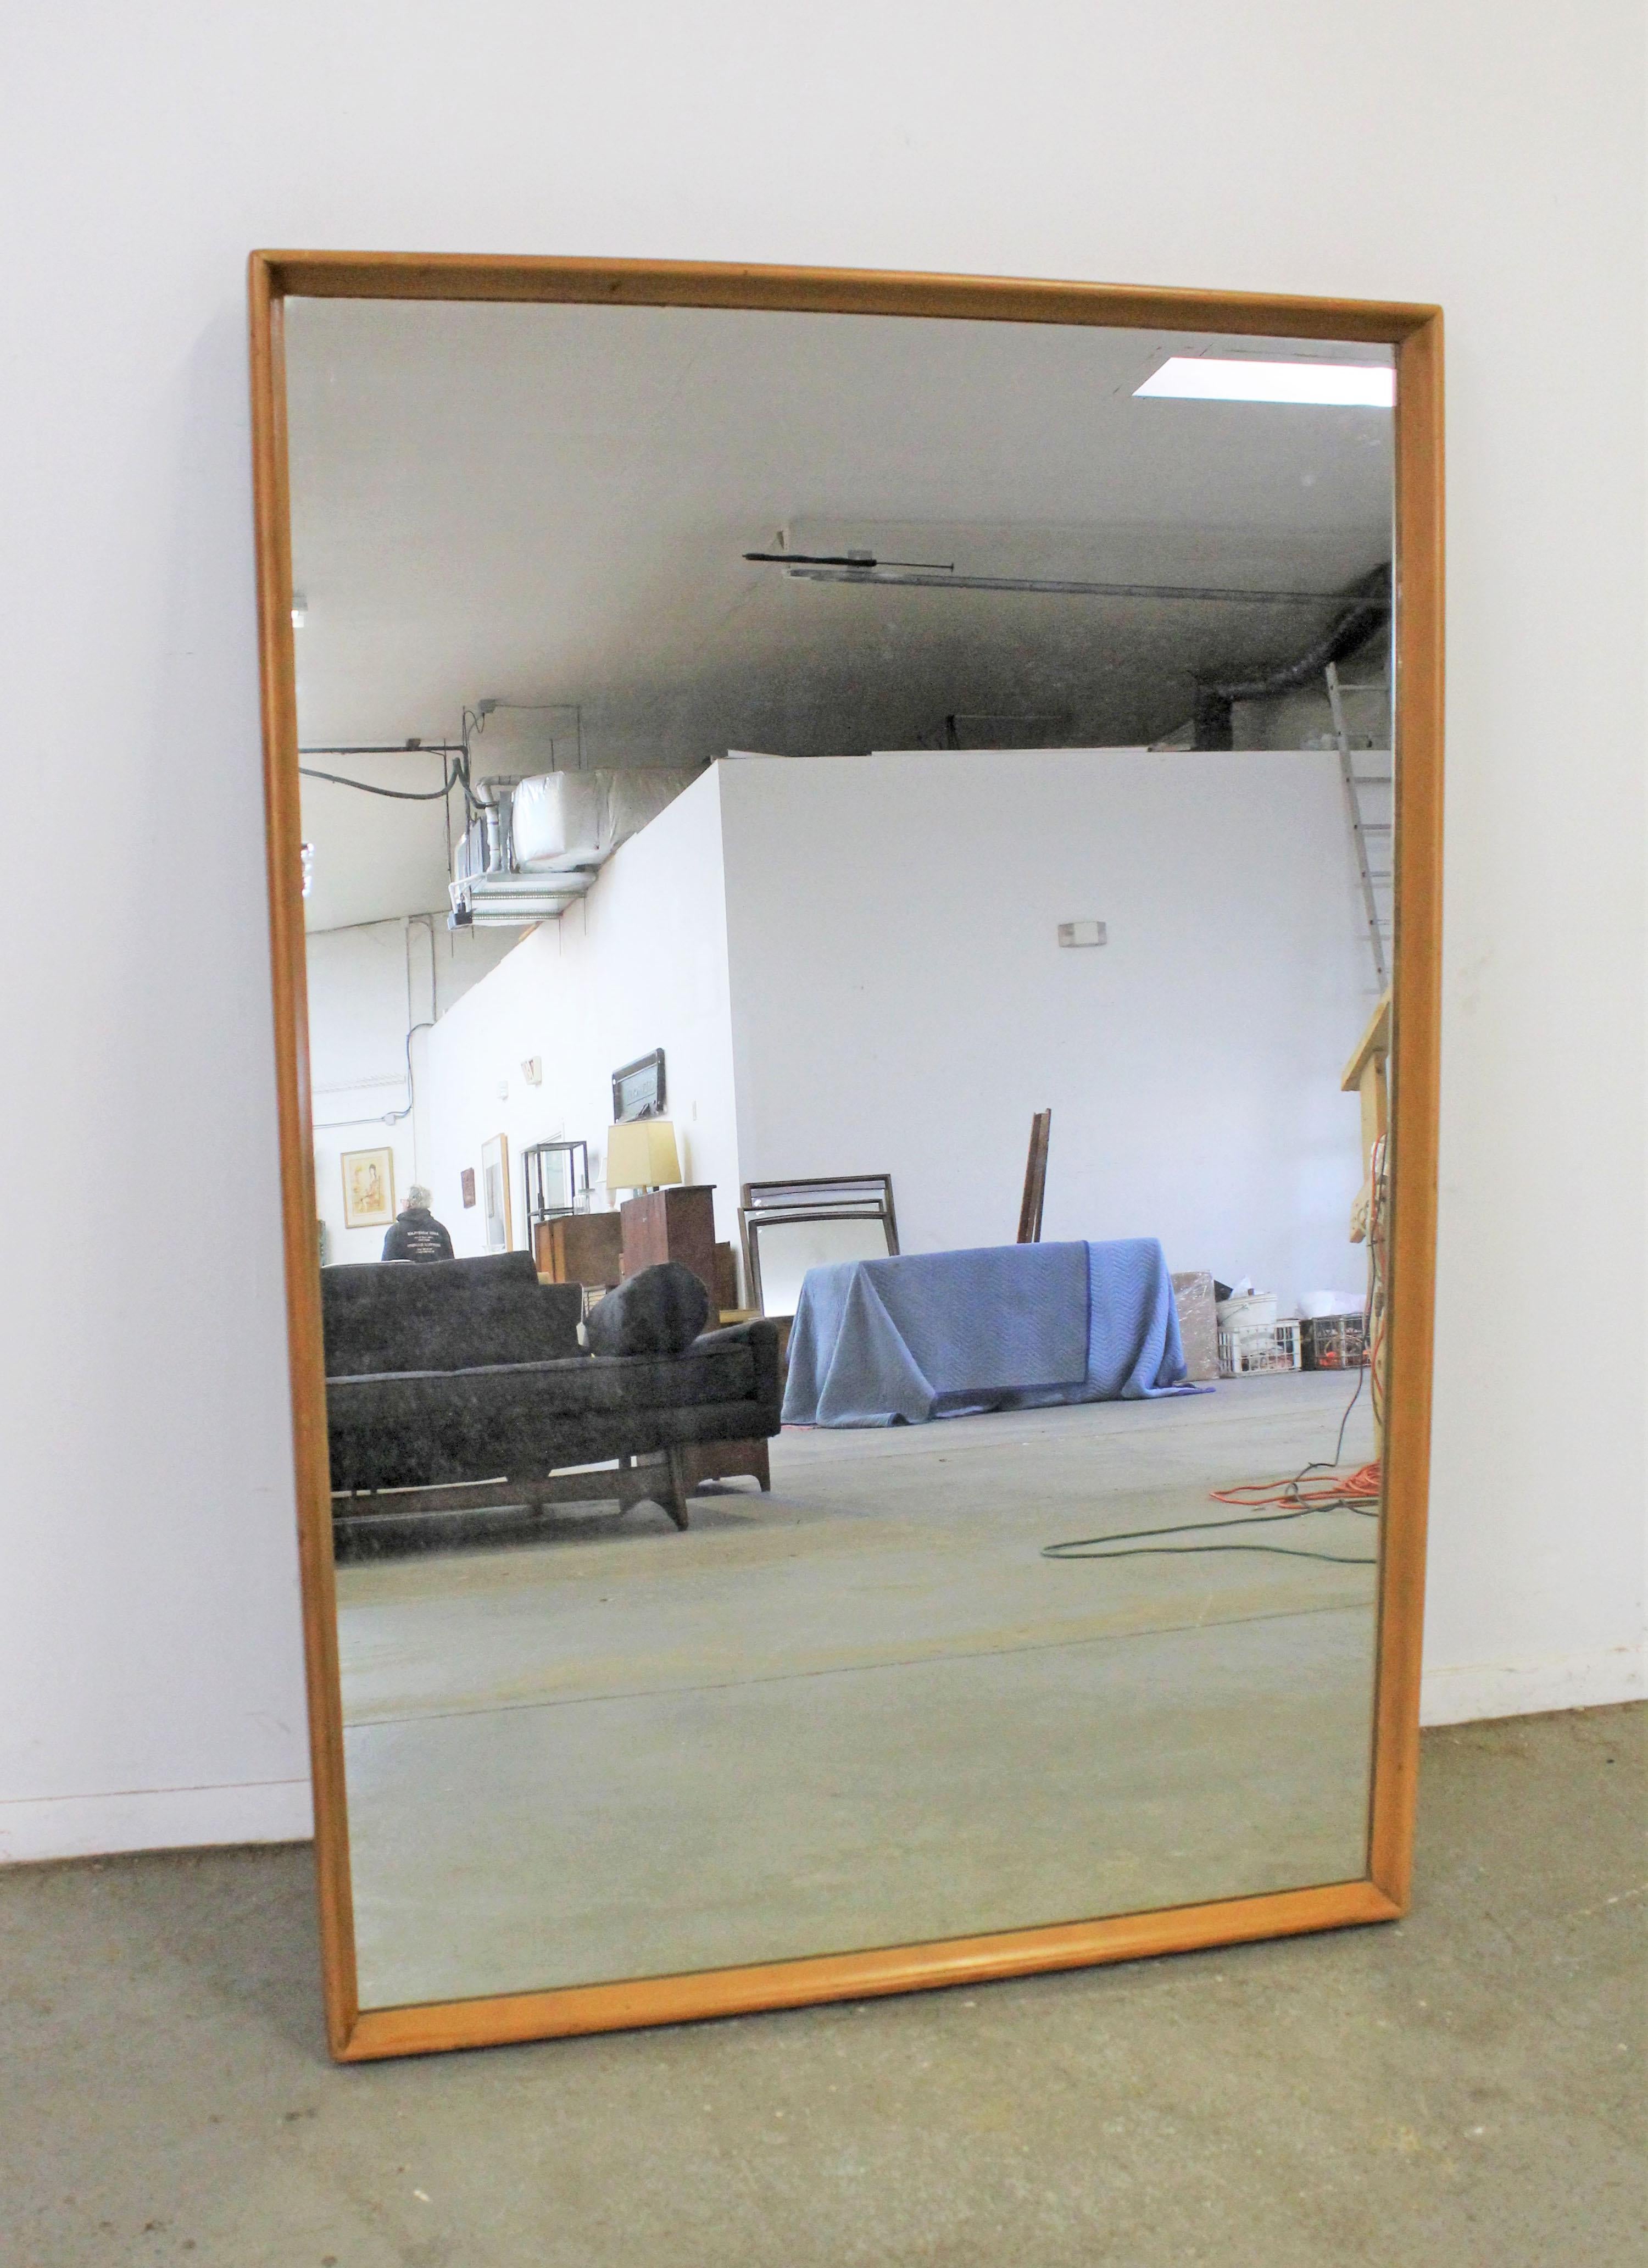 Offered is a large vintage Mid-Century Modern mirror by Heywood Wakefield. It has a wood frame with a Champagne finish. It is in good condition for its age, shows some age wear including minor imperfections on the glass and surface scratches/wear on